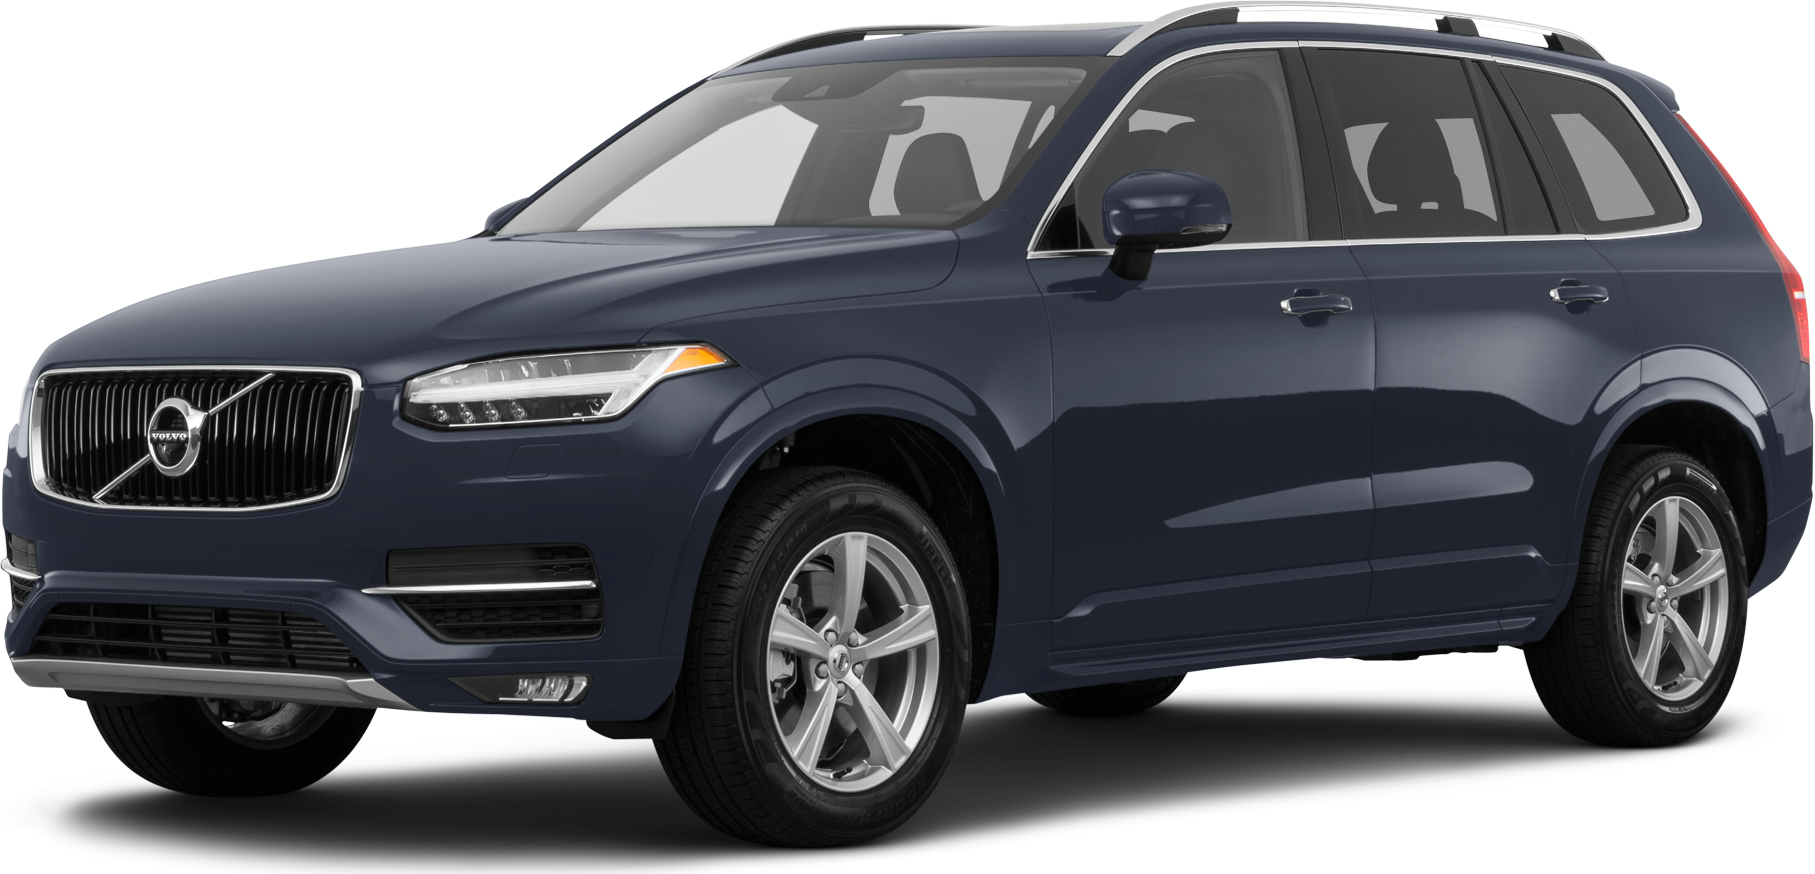 Volvo XC90 (2017) long-term test review